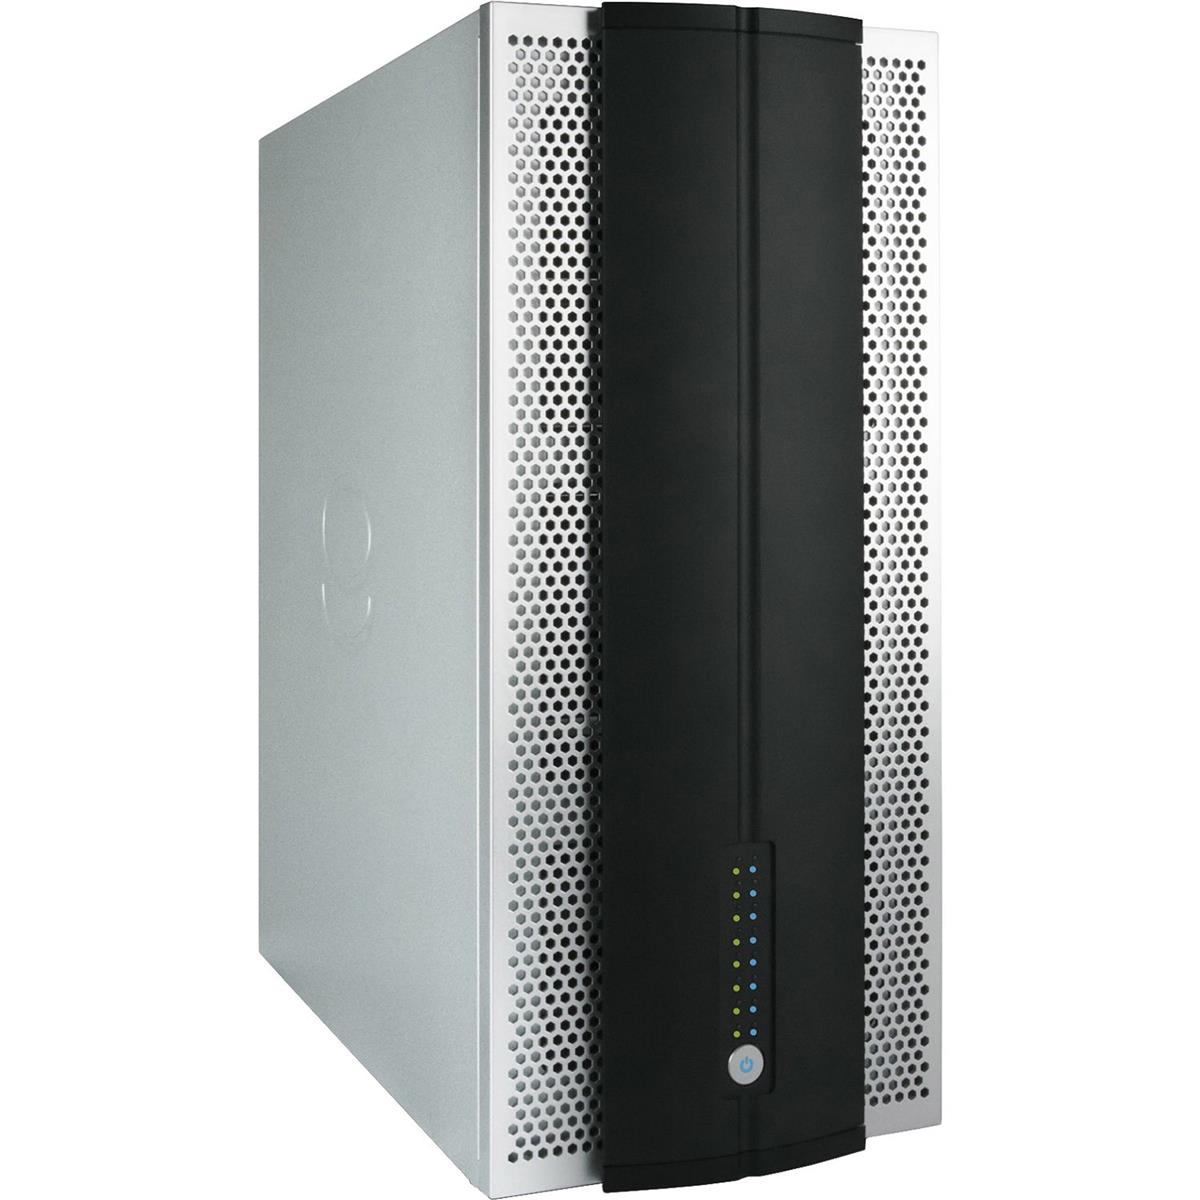 Image of Accusys ExaSAN A12S3-SJ 12-Bay JBOD Subsystem for A12S3-PS RAID System